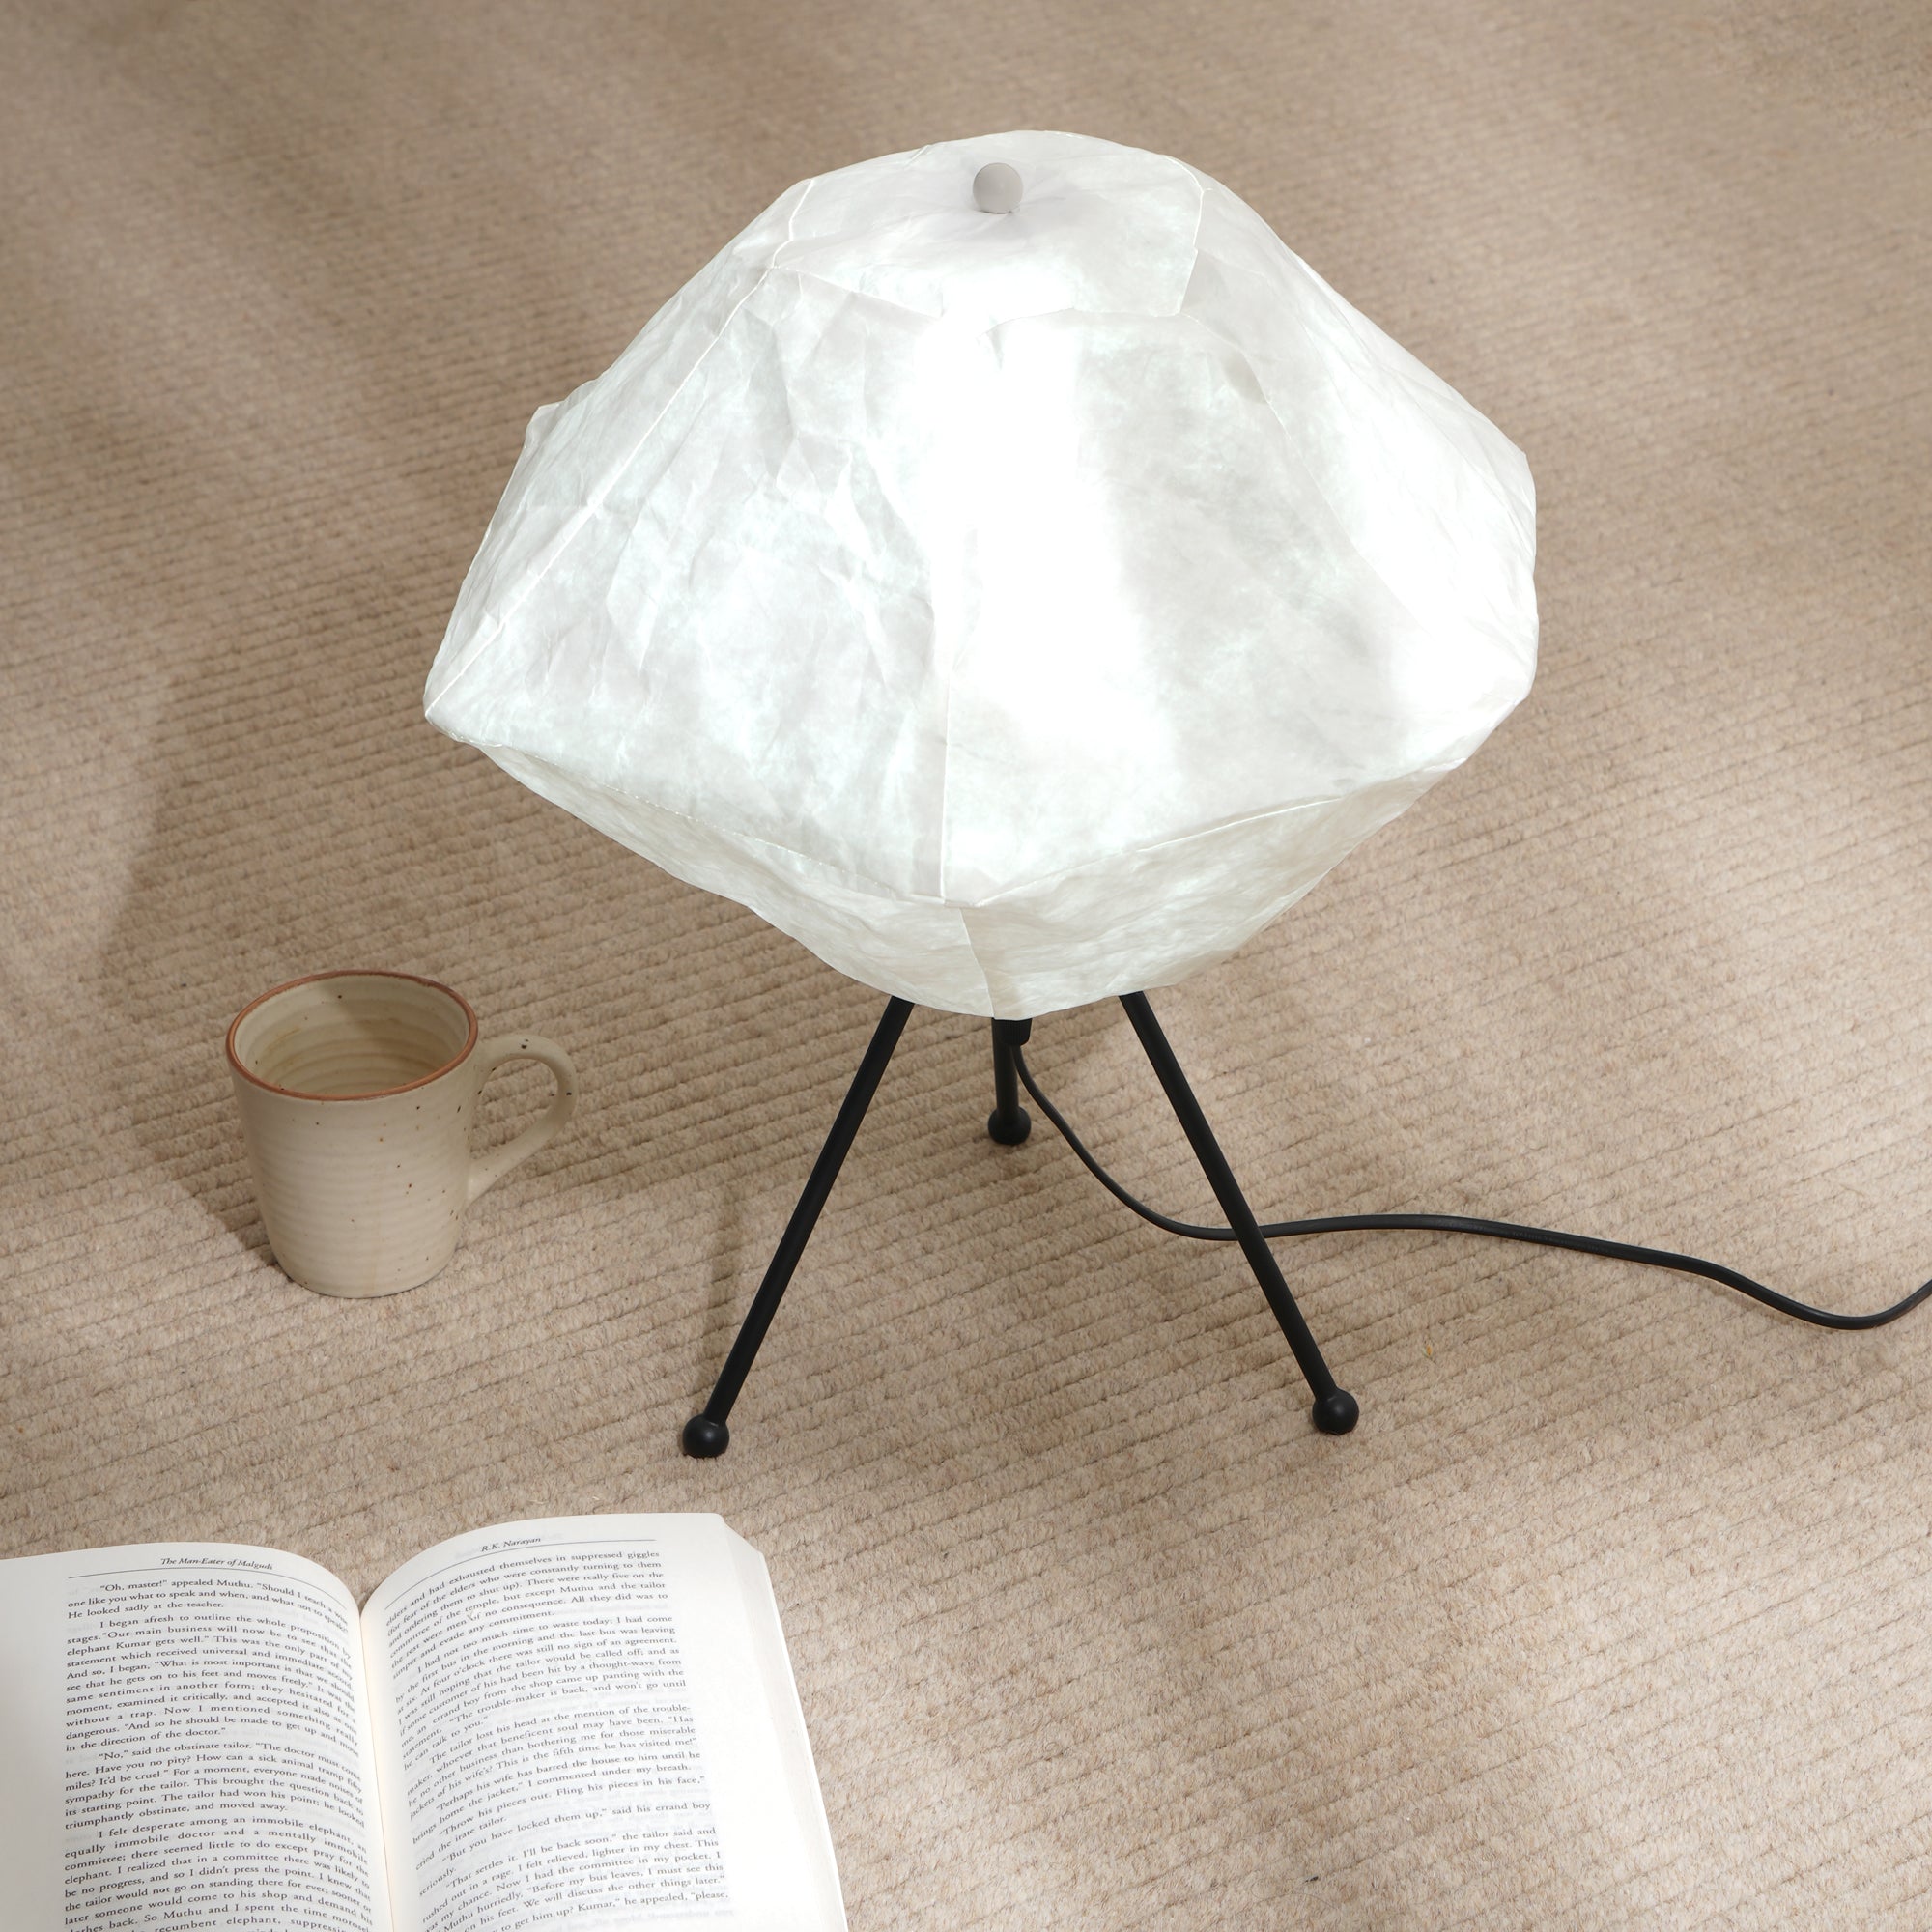 Luna Table Lamp - Tripod Table Lamp, Innovative Handcrafted Design, Recycled Polyethylene and Metal